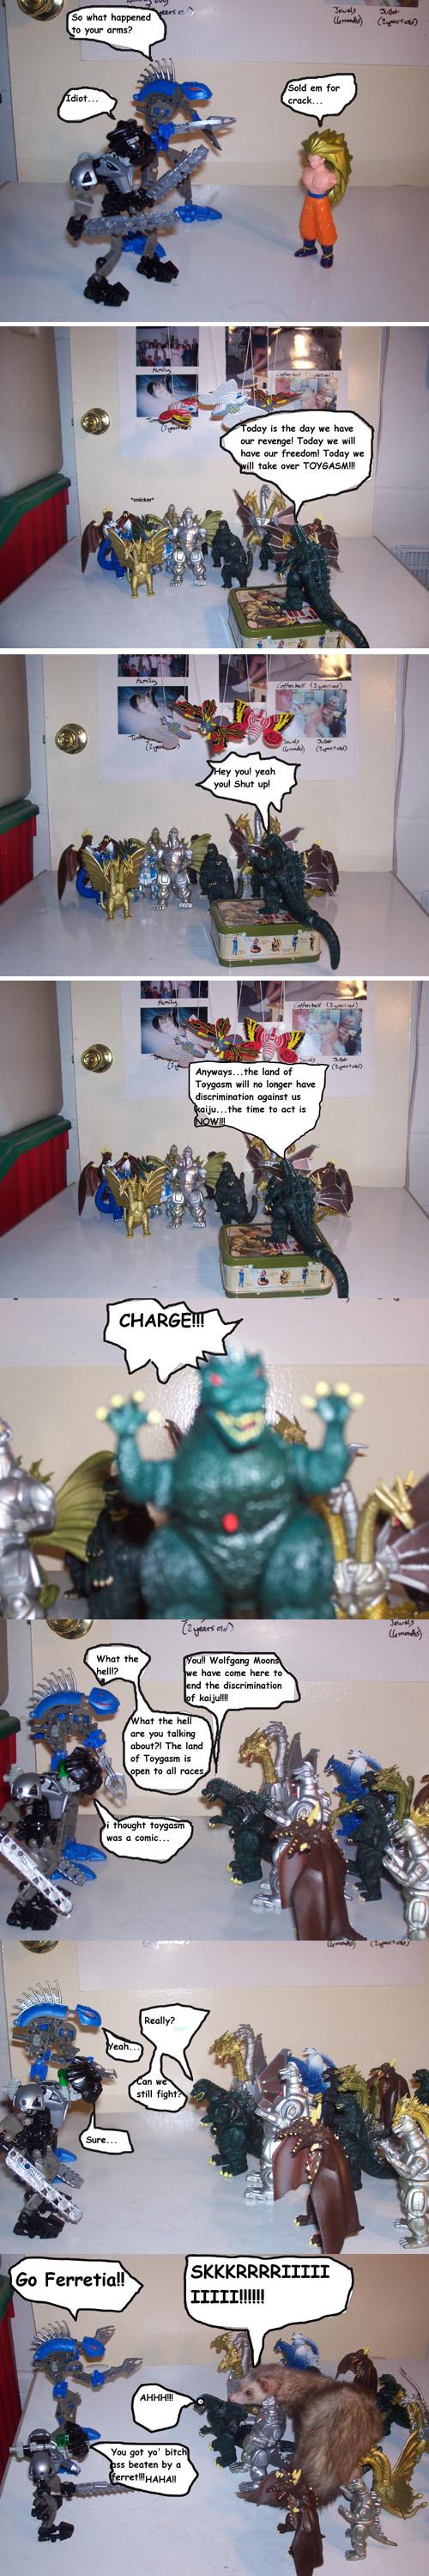 The attack of the kaiju